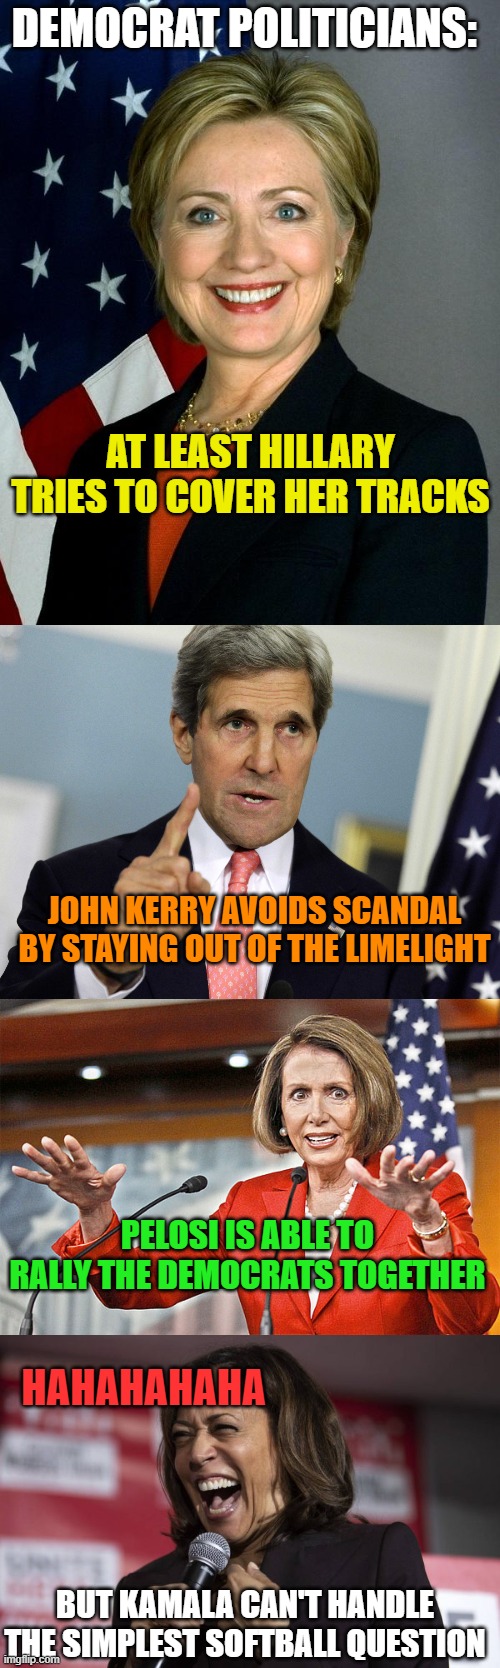 DEMOCRAT POLITICIANS:; AT LEAST HILLARY TRIES TO COVER HER TRACKS; JOHN KERRY AVOIDS SCANDAL BY STAYING OUT OF THE LIMELIGHT; PELOSI IS ABLE TO RALLY THE DEMOCRATS TOGETHER; HAHAHAHAHA; BUT KAMALA CAN'T HANDLE THE SIMPLEST SOFTBALL QUESTION | image tagged in memes,hillary clinton,john kerry i was for it before i was against it,nancy pelosi is crazy,kamala laughing | made w/ Imgflip meme maker